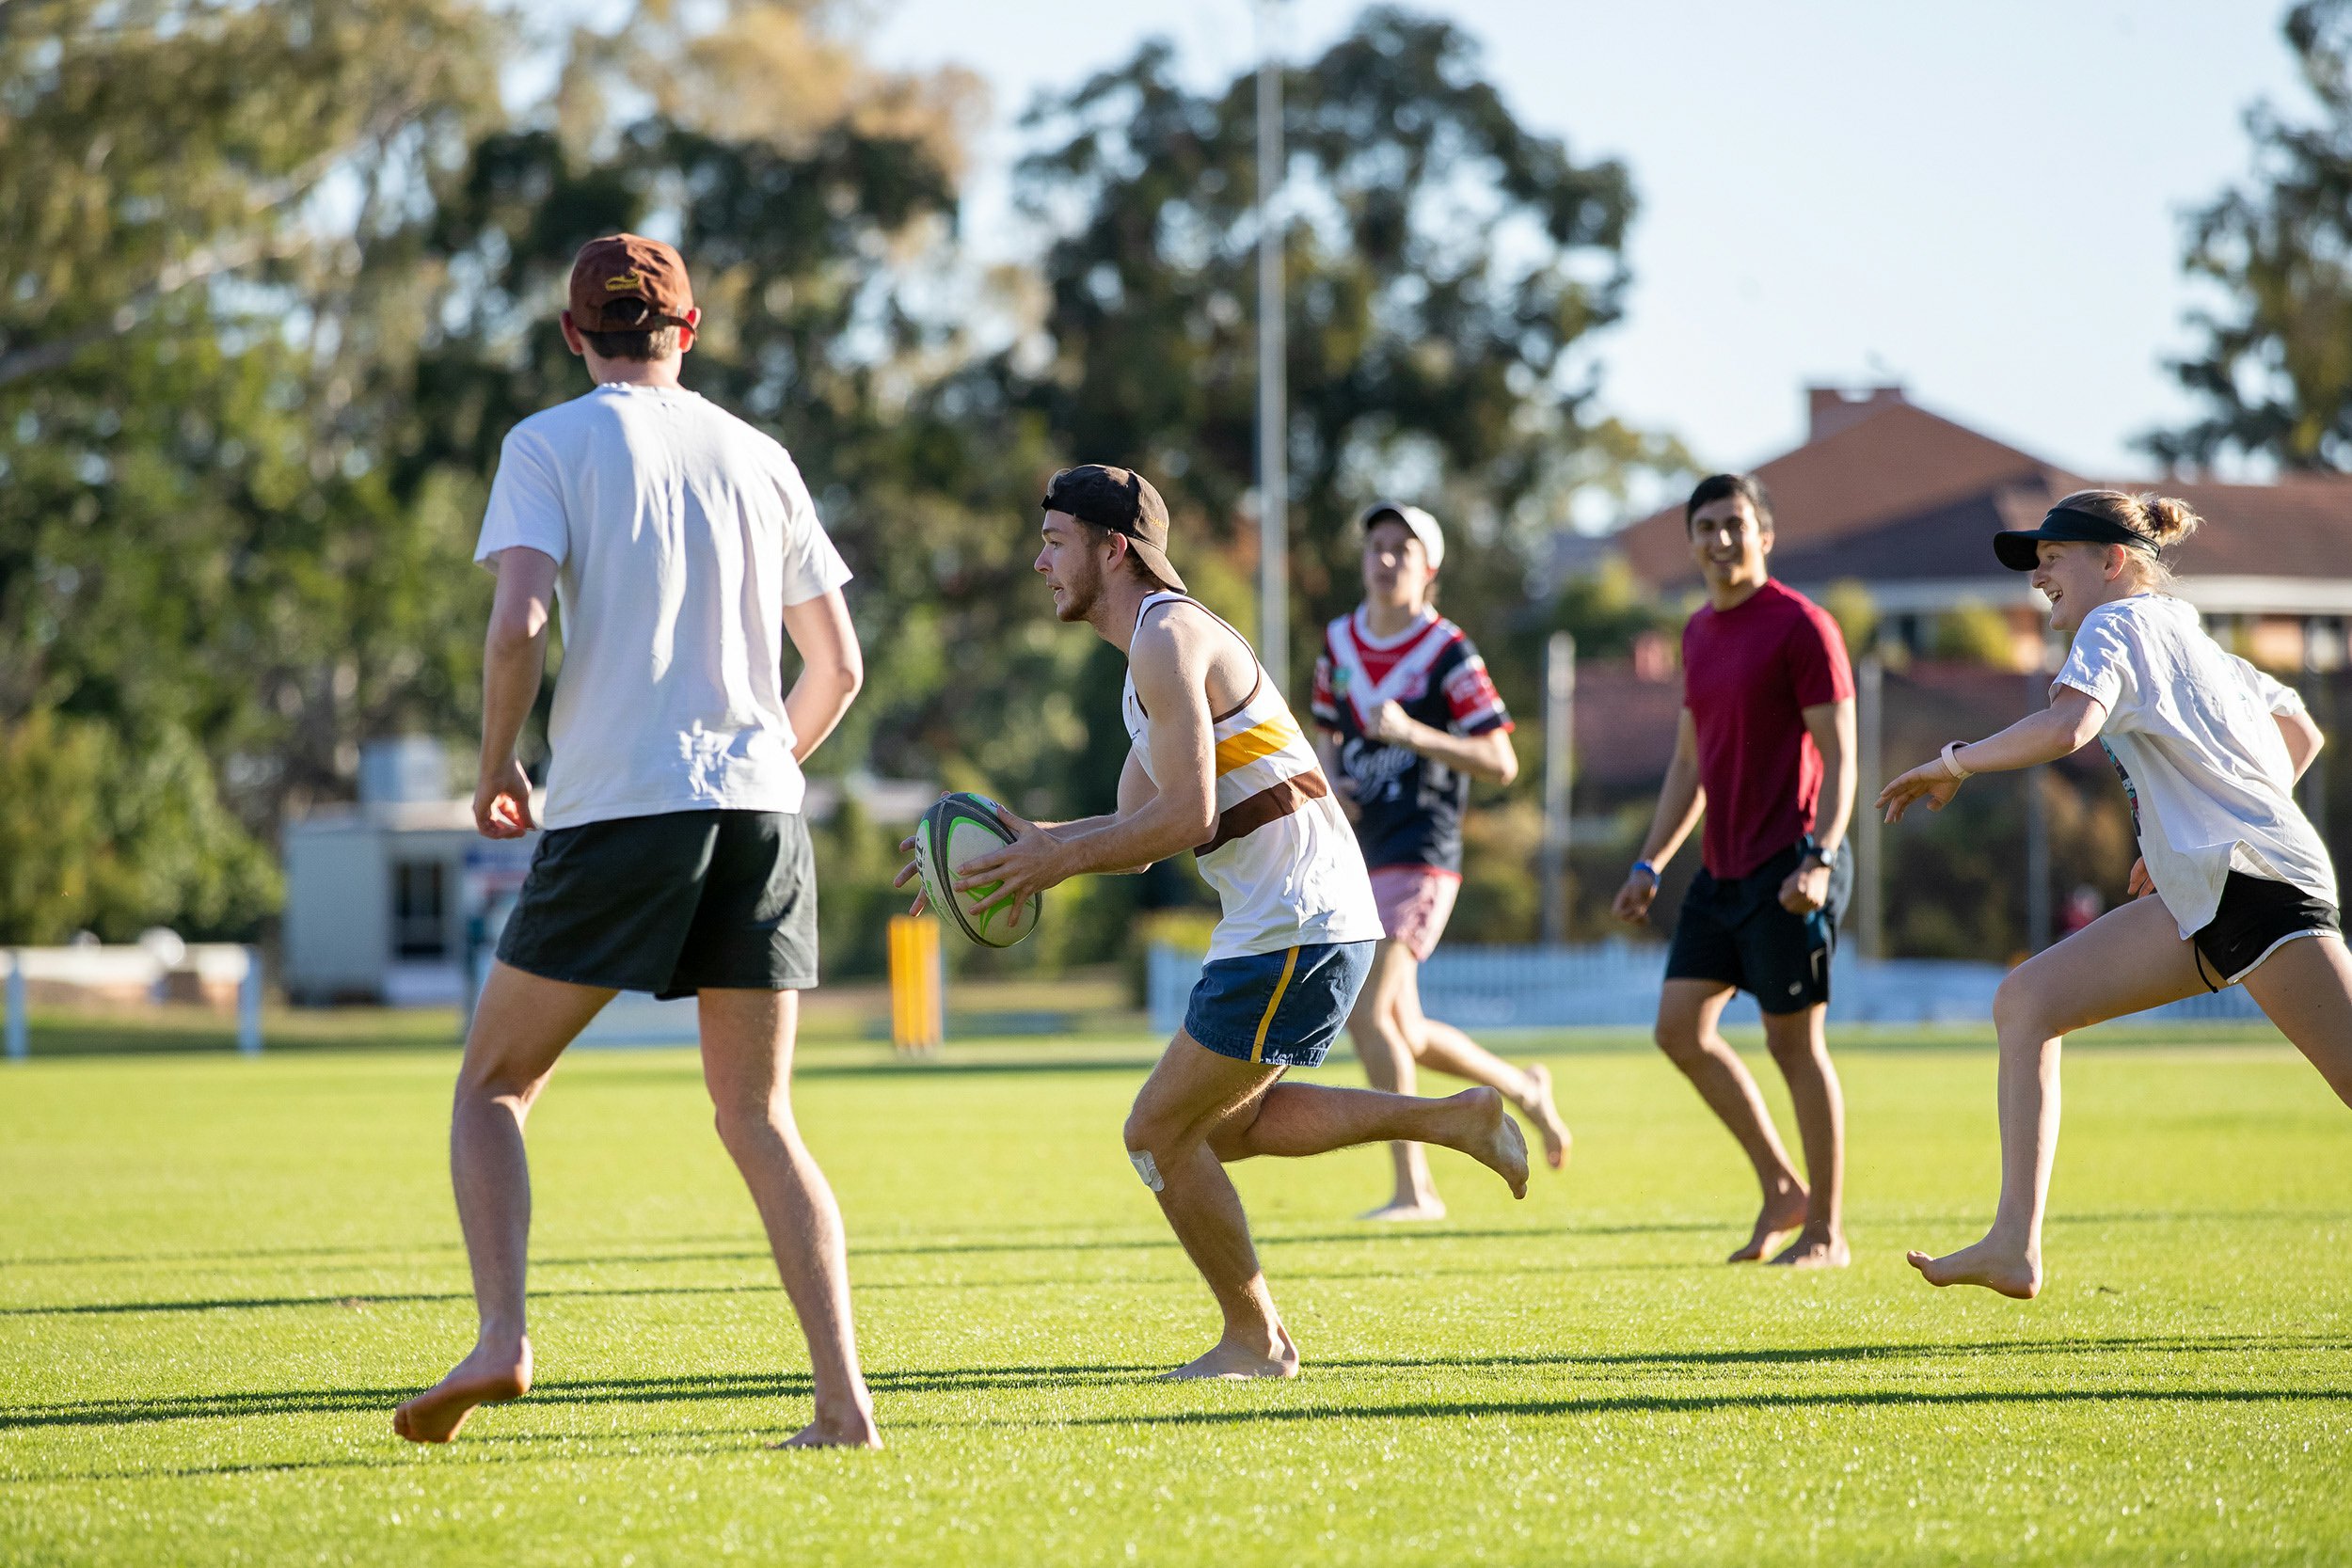 University of queensland student athletes playing footie